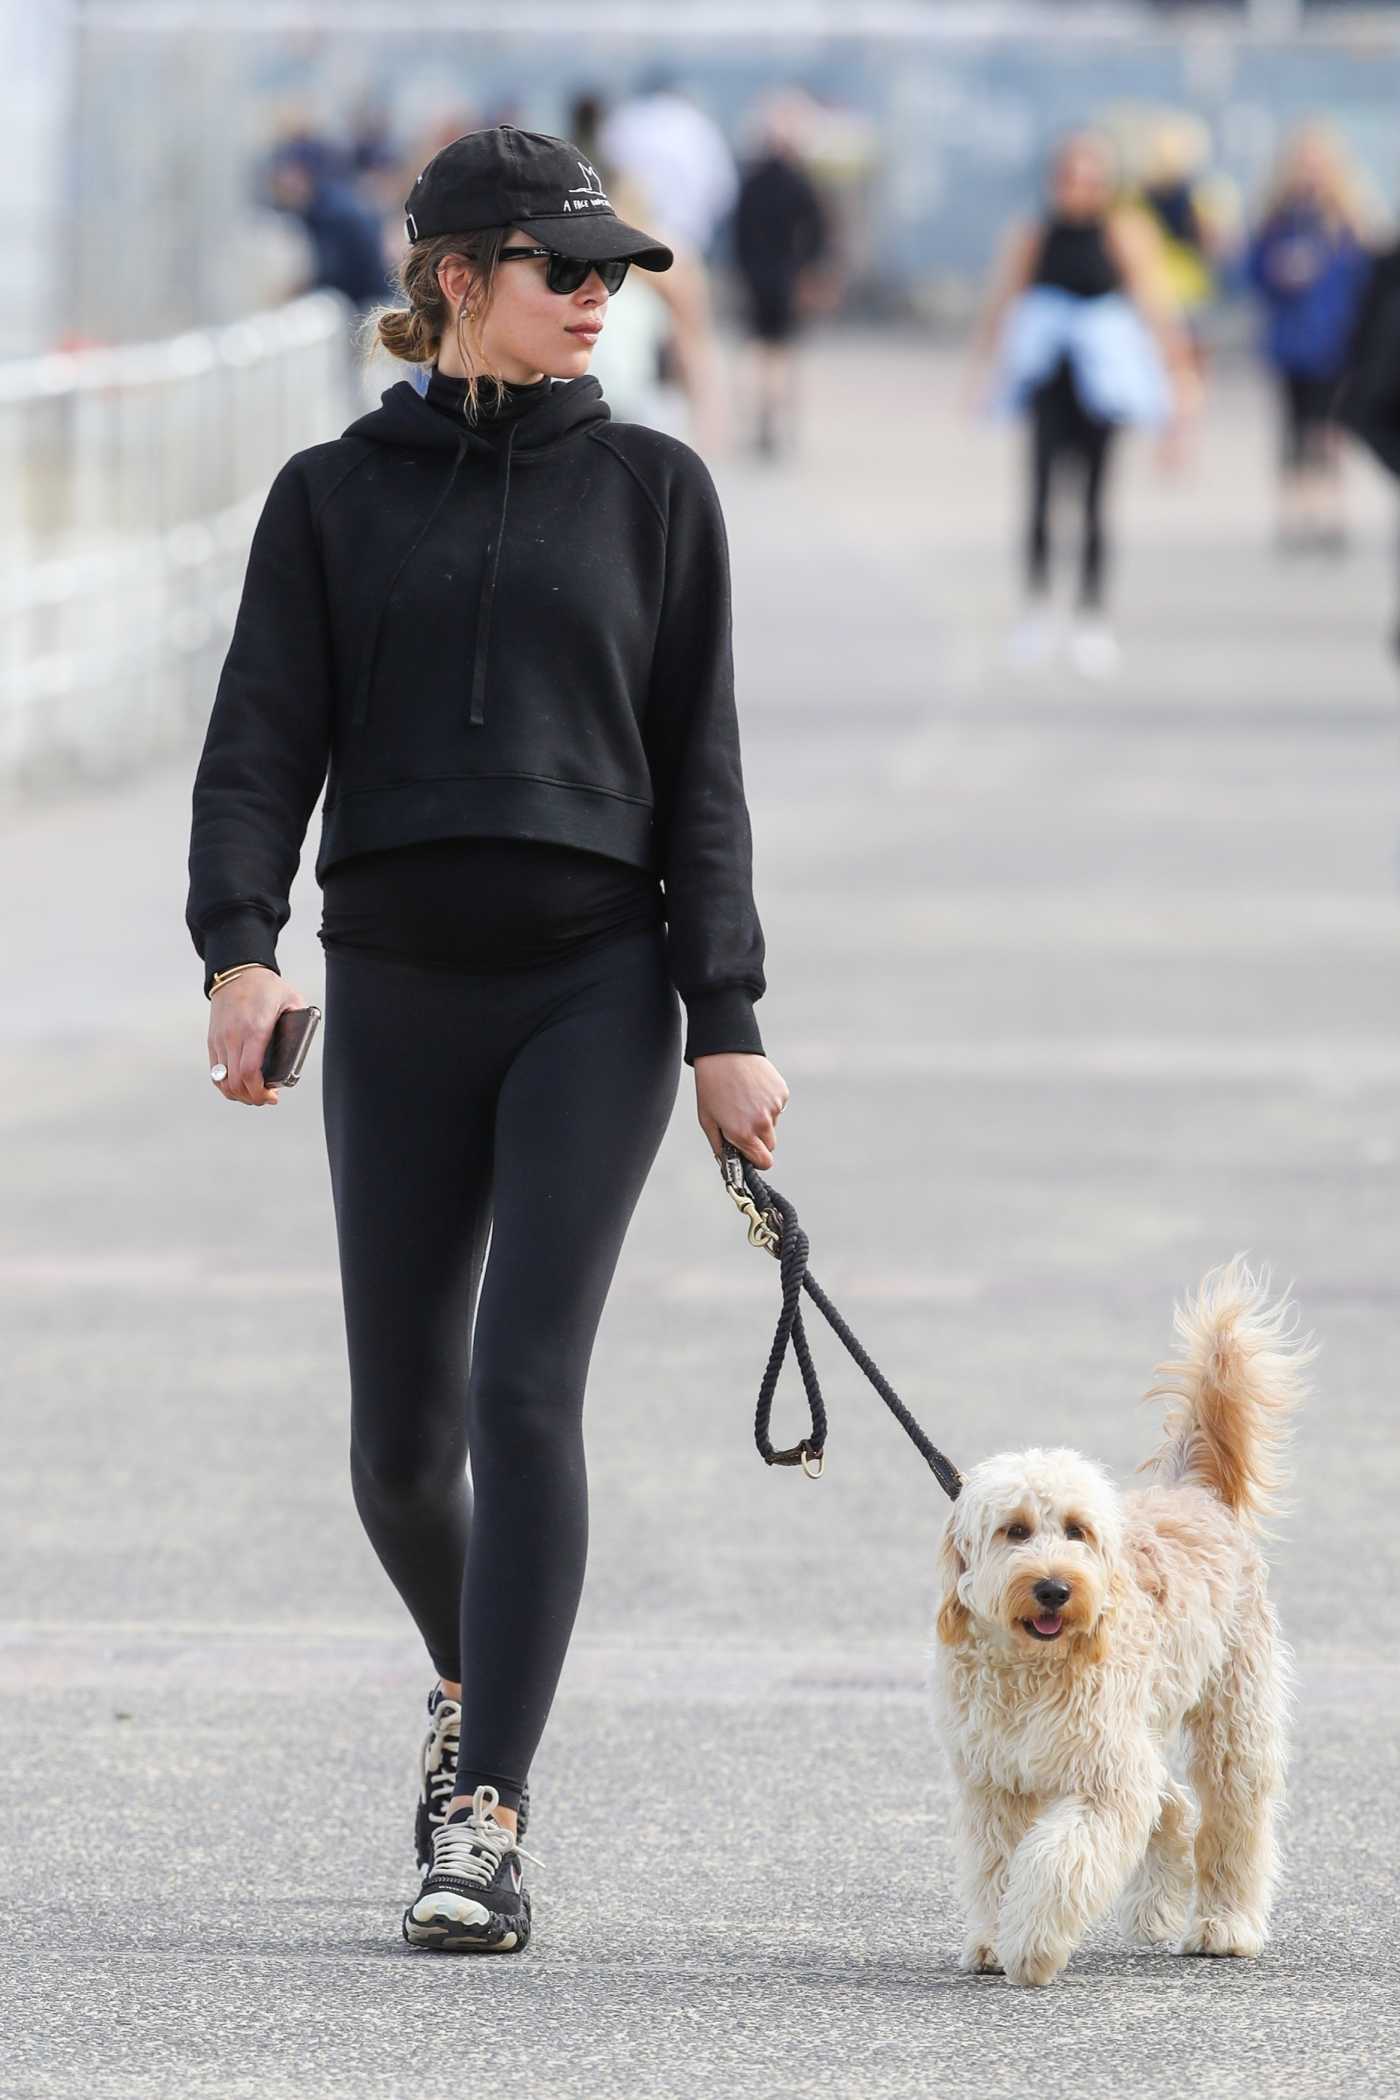 Georgia Fowler in a Black Outfit Walks Her Pooch in Sydney 07/19/2021